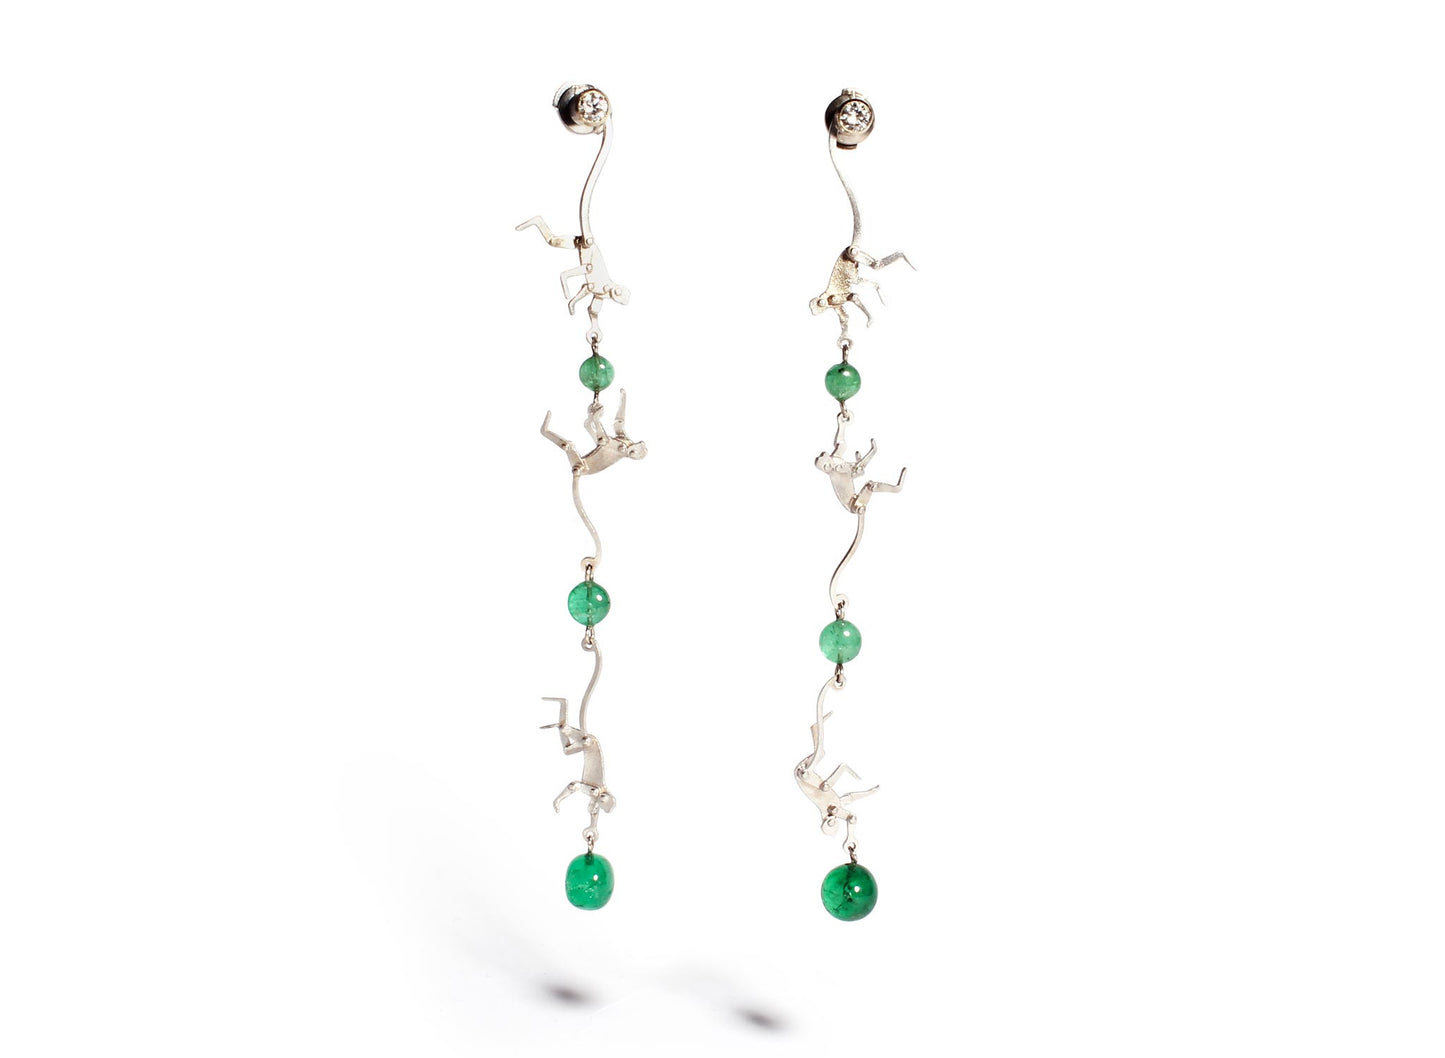 Micro Monkey Linked Earrings with Emeralds and White Diamonds